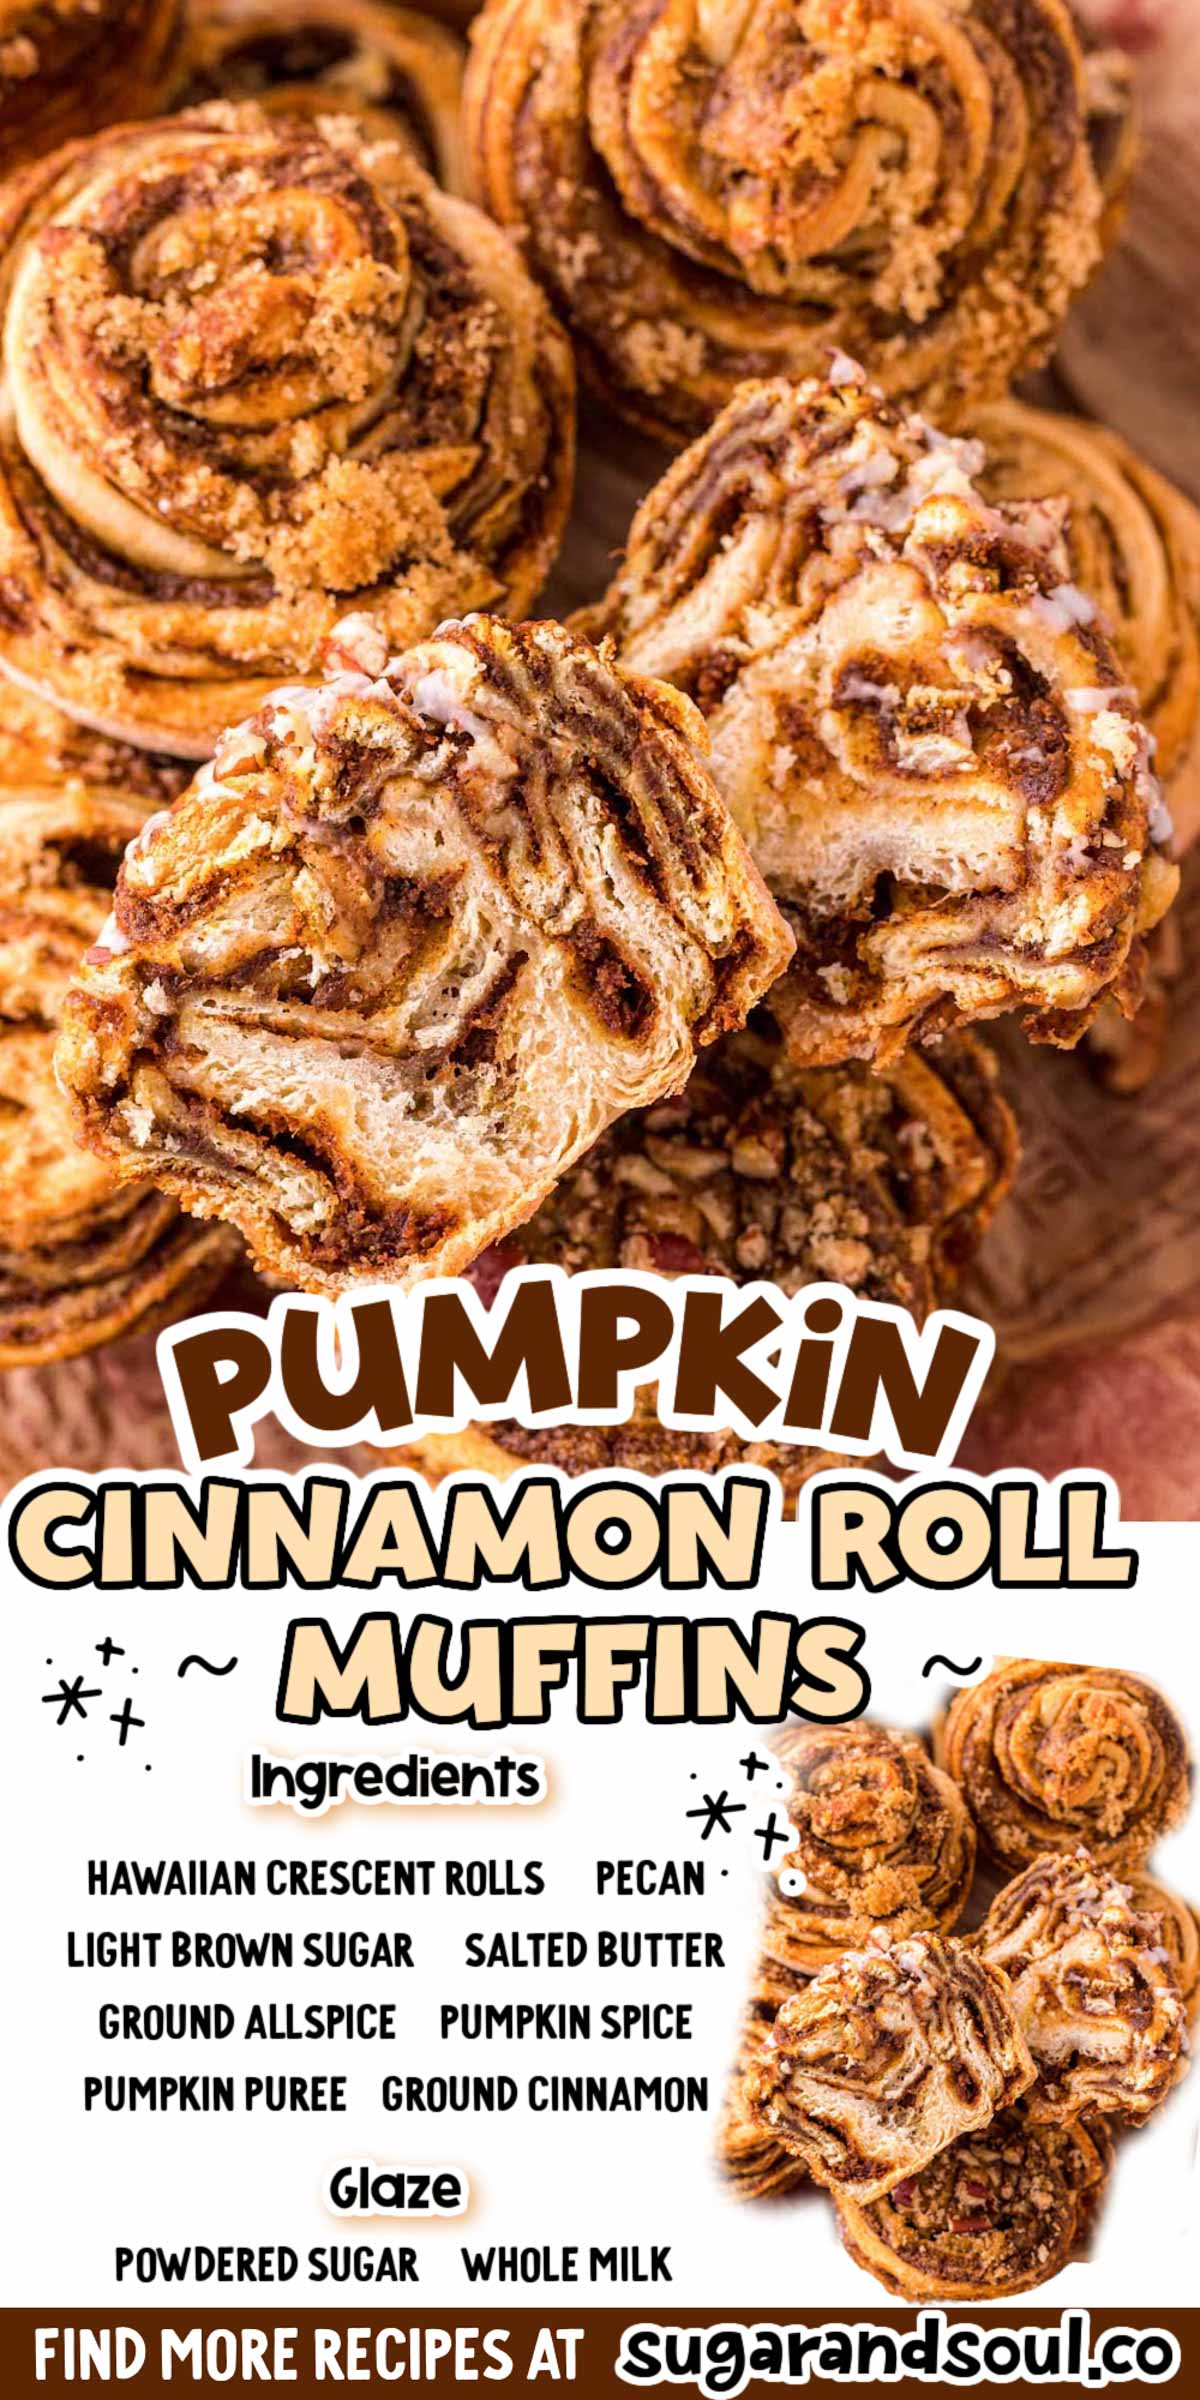 Easy Pumpkin Cinnamon Roll Muffins are overflowing with the glorious flavors of fall yet take less than 20 minutes to bake up to tasty perfection! Topped off with sweet brown sugar, crunchy pecans, and a 2-ingredient glaze! via @sugarandsoulco